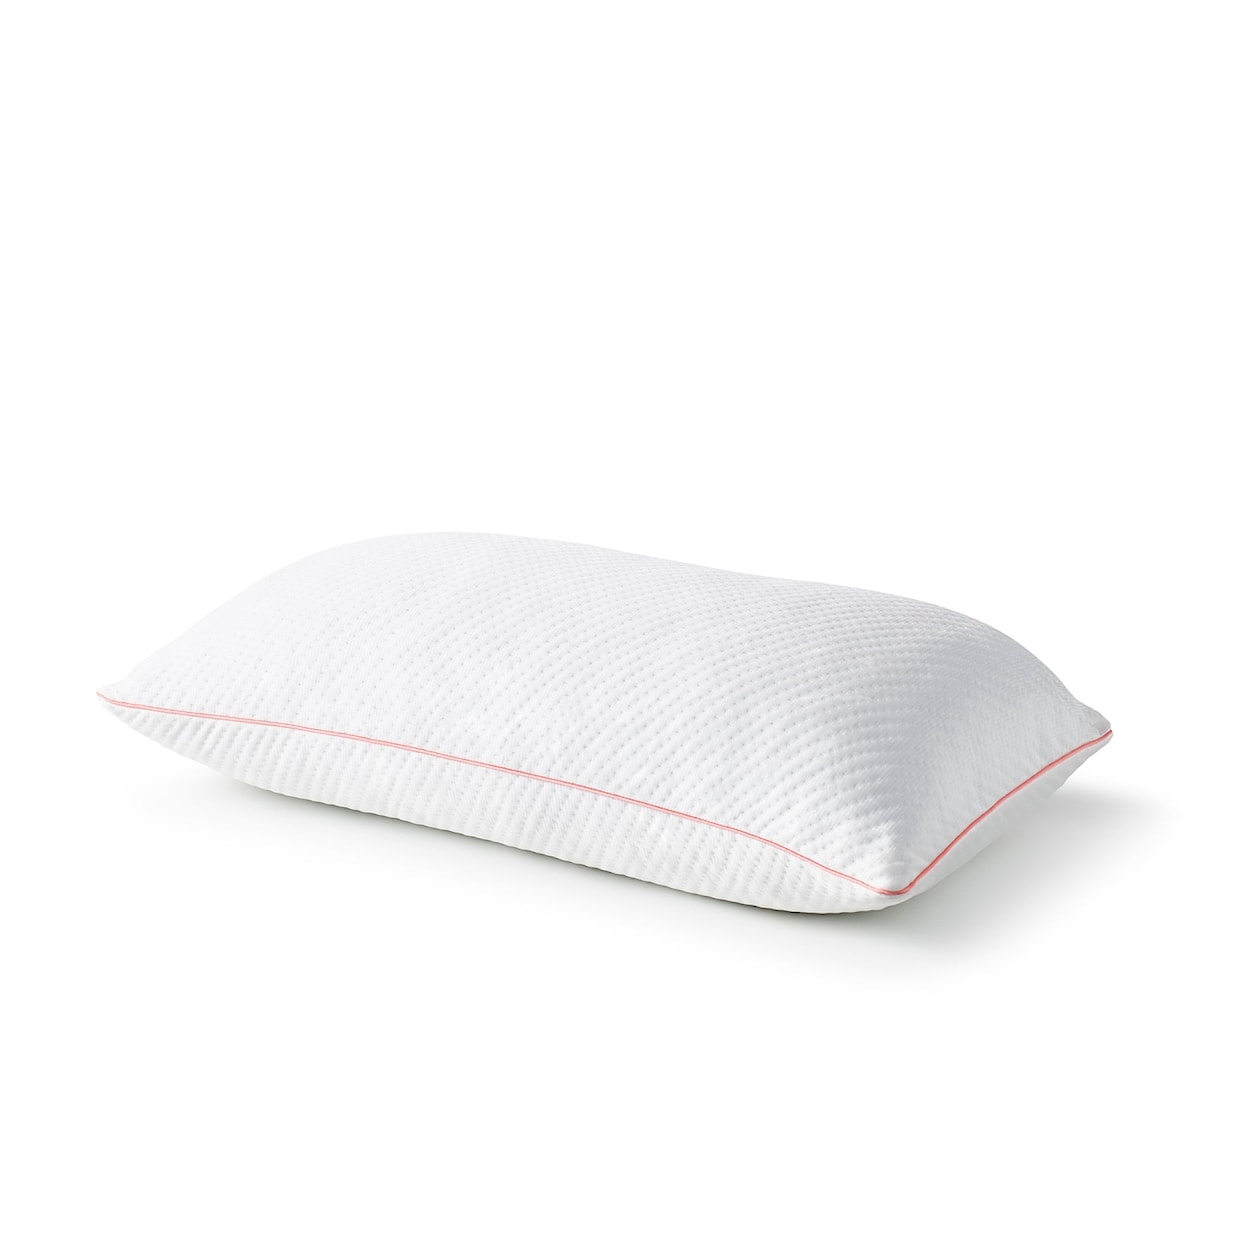 Sam's Furniture Sleep Essentials Icetone Breathable Support Pillow